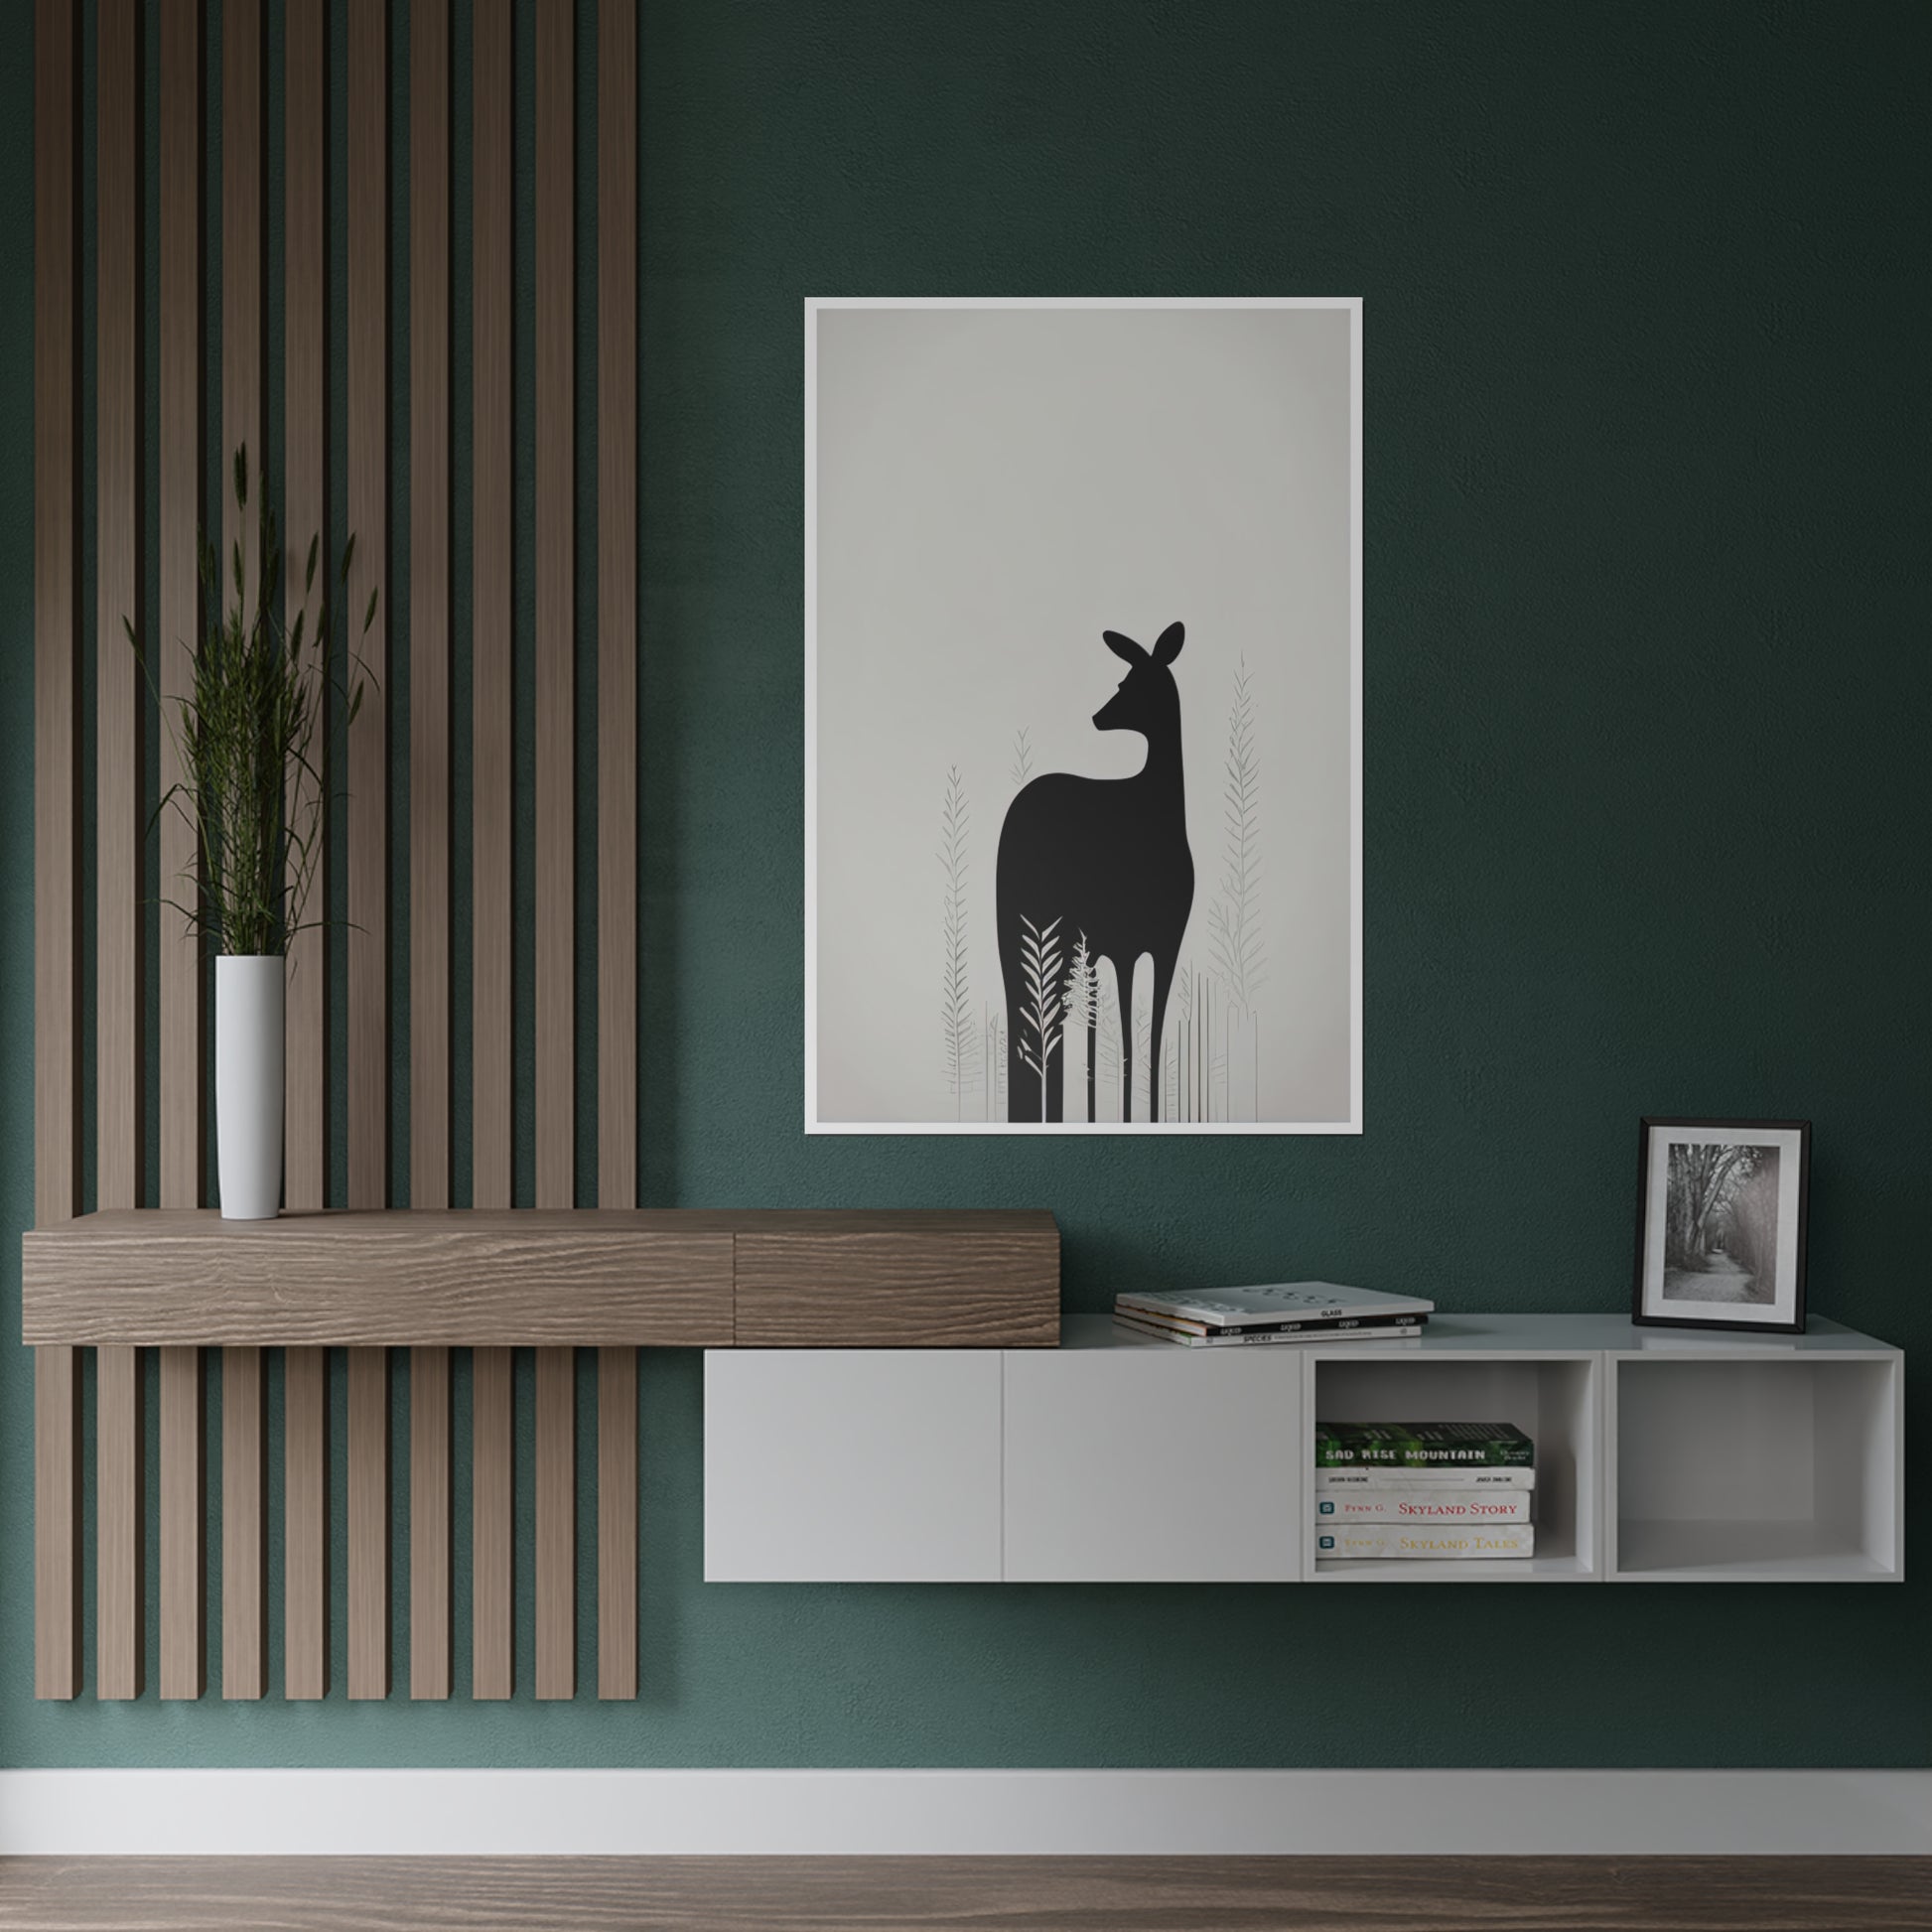 Palette of Tranquility (3/3) Silhouette of Elegance - Satin Poster gracefully unveils the poised silhouette of a female deer, evoking serenity and introspection as she gazes into the distance. Using a spectrum of greys and blacks, her figure contrasts beautifully with the delicately textured backdrop. The surrounding monochromatic flora complements without overshadowing, preserving the series' minimalist elegance.